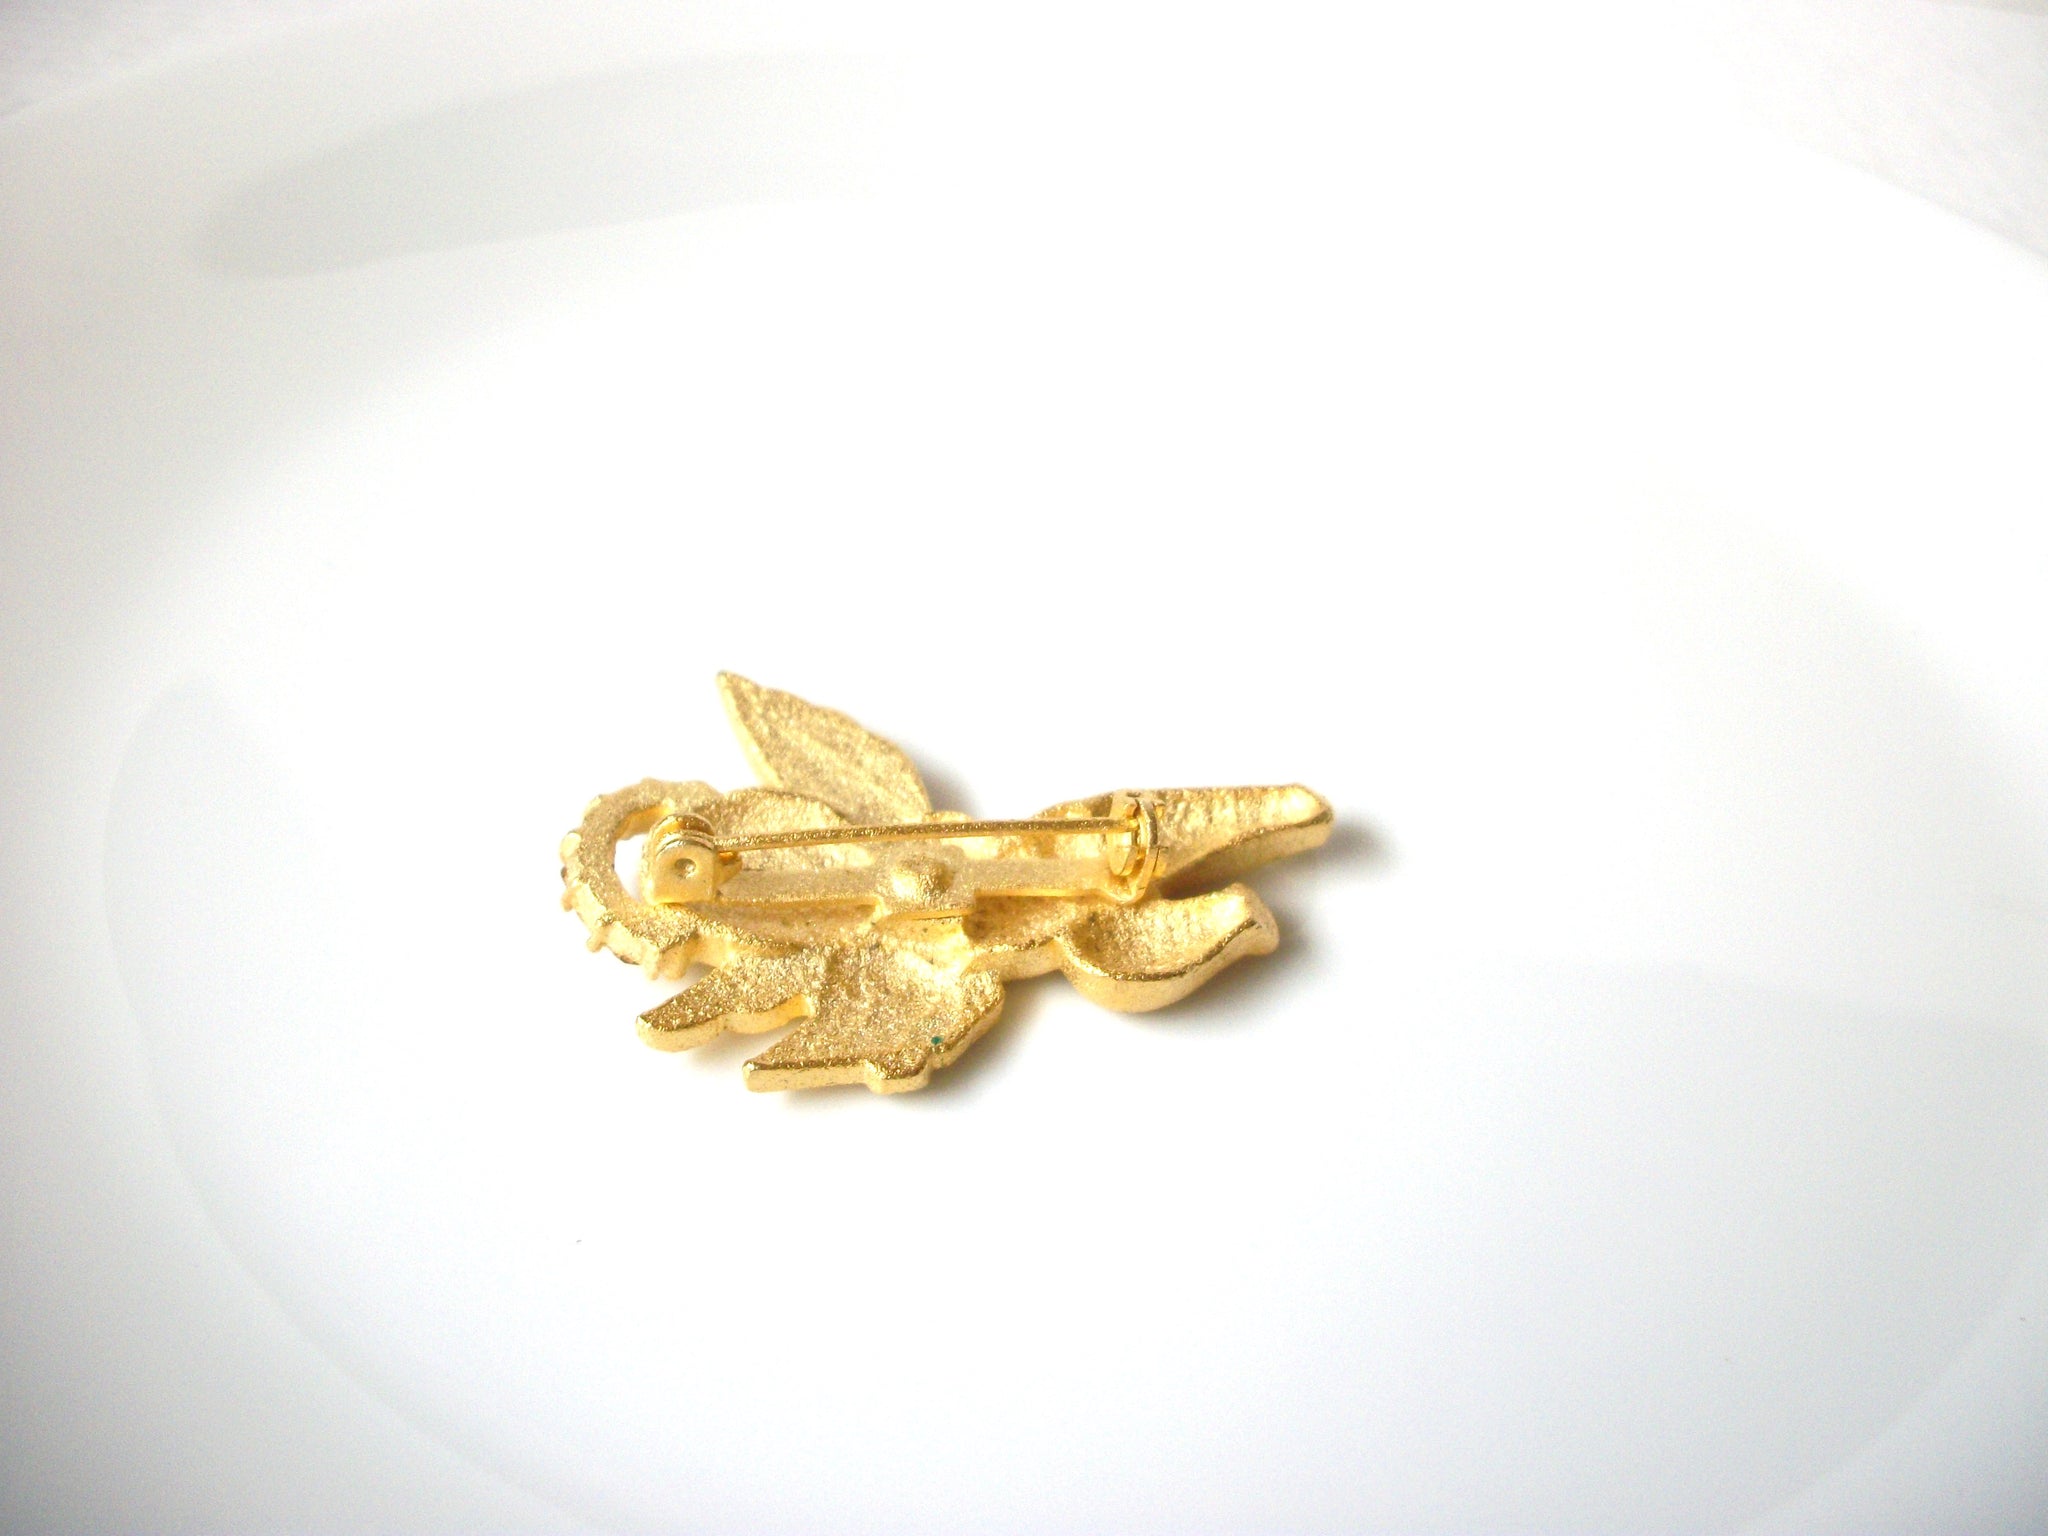 Vintage 1950s Gold Toned Angel Brooch Pin 121620